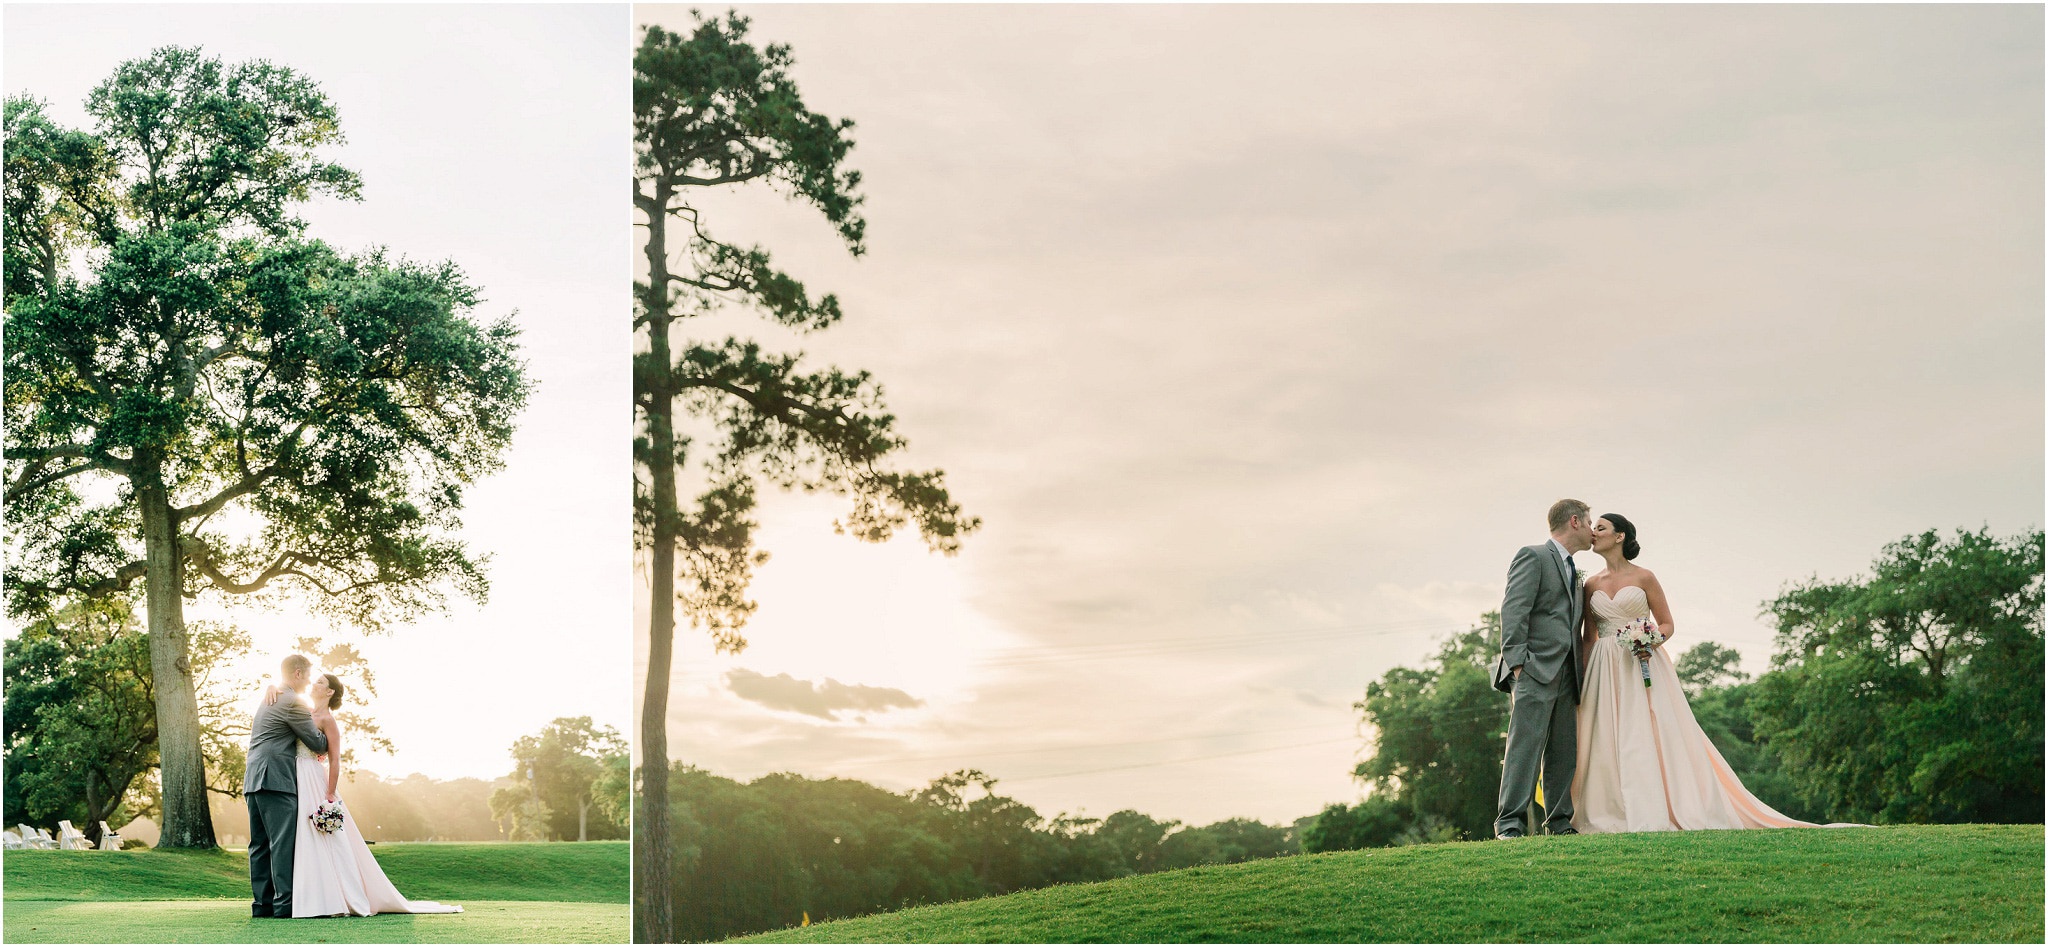 Sunset portraits by Myrtle Beach wedding photographer bride and groom kissing on the green